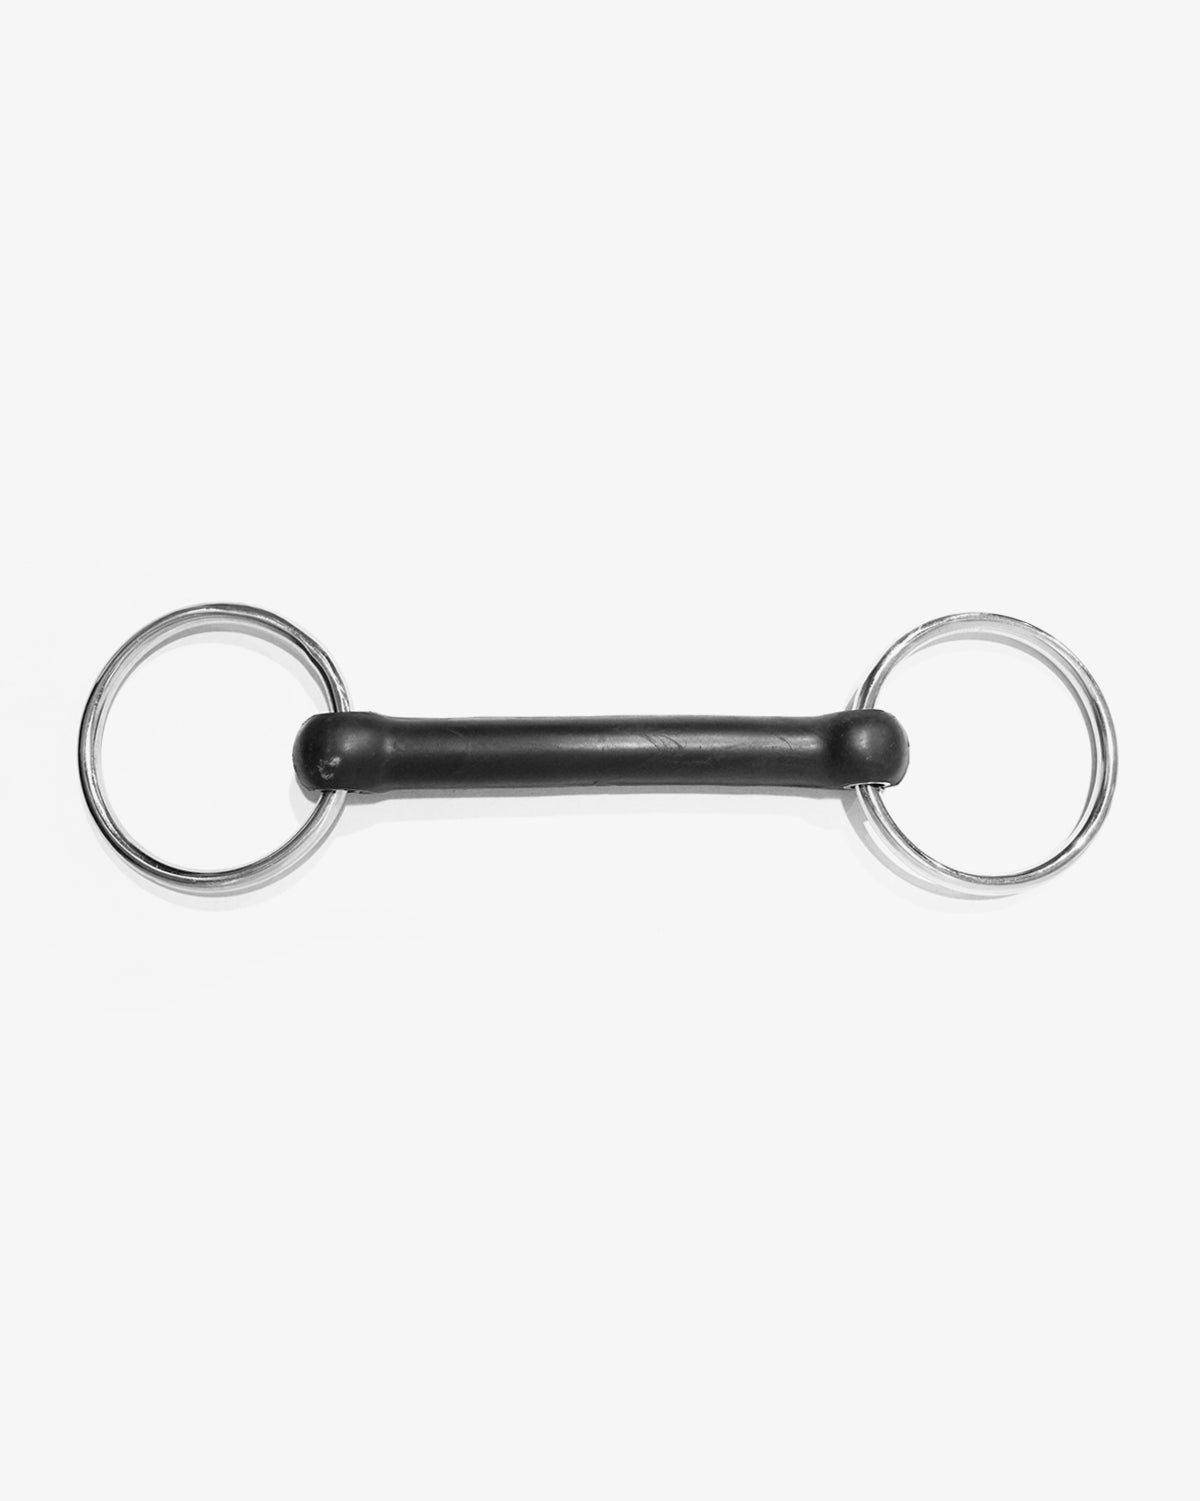 Flexible Rubber Loose Ring Mouth Bit